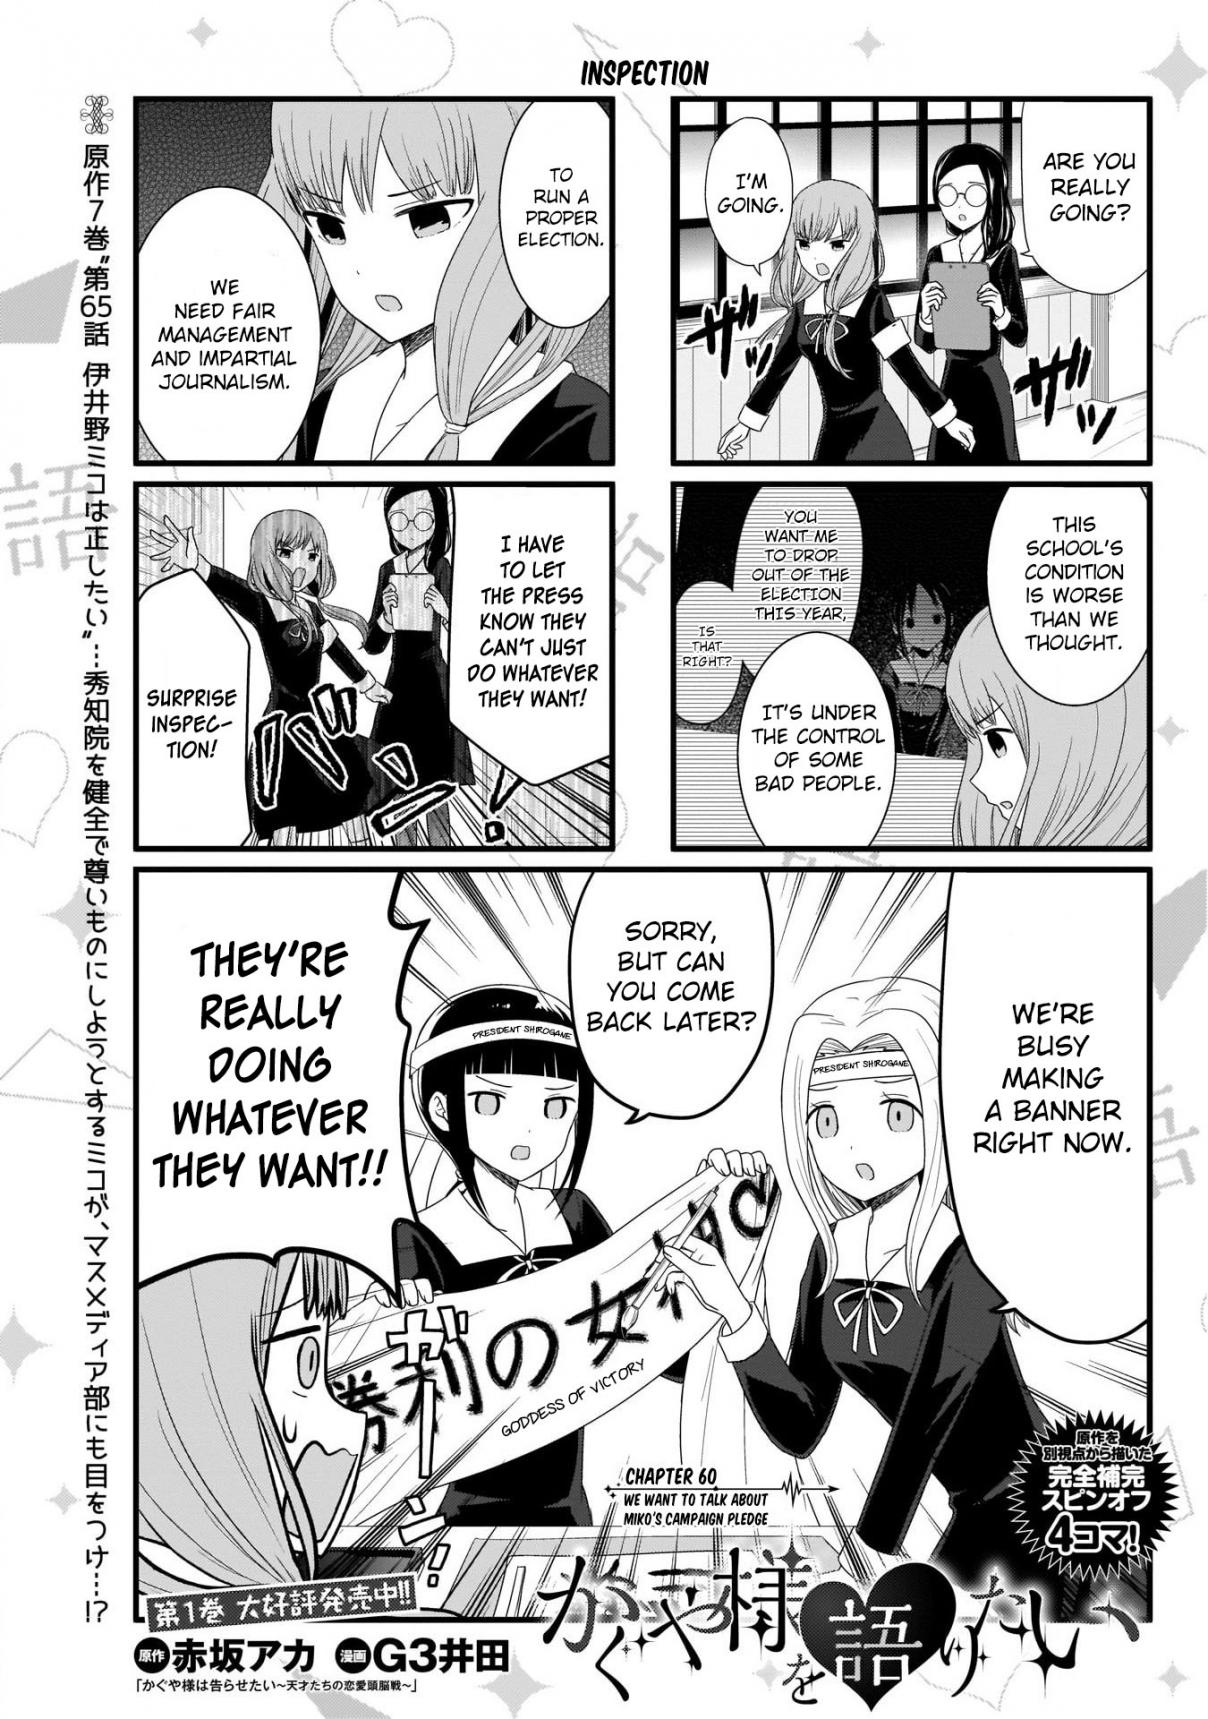 We Want To Talk About Kaguya Ch. 60 We Want to Talk About Miko's Campaign Pledge